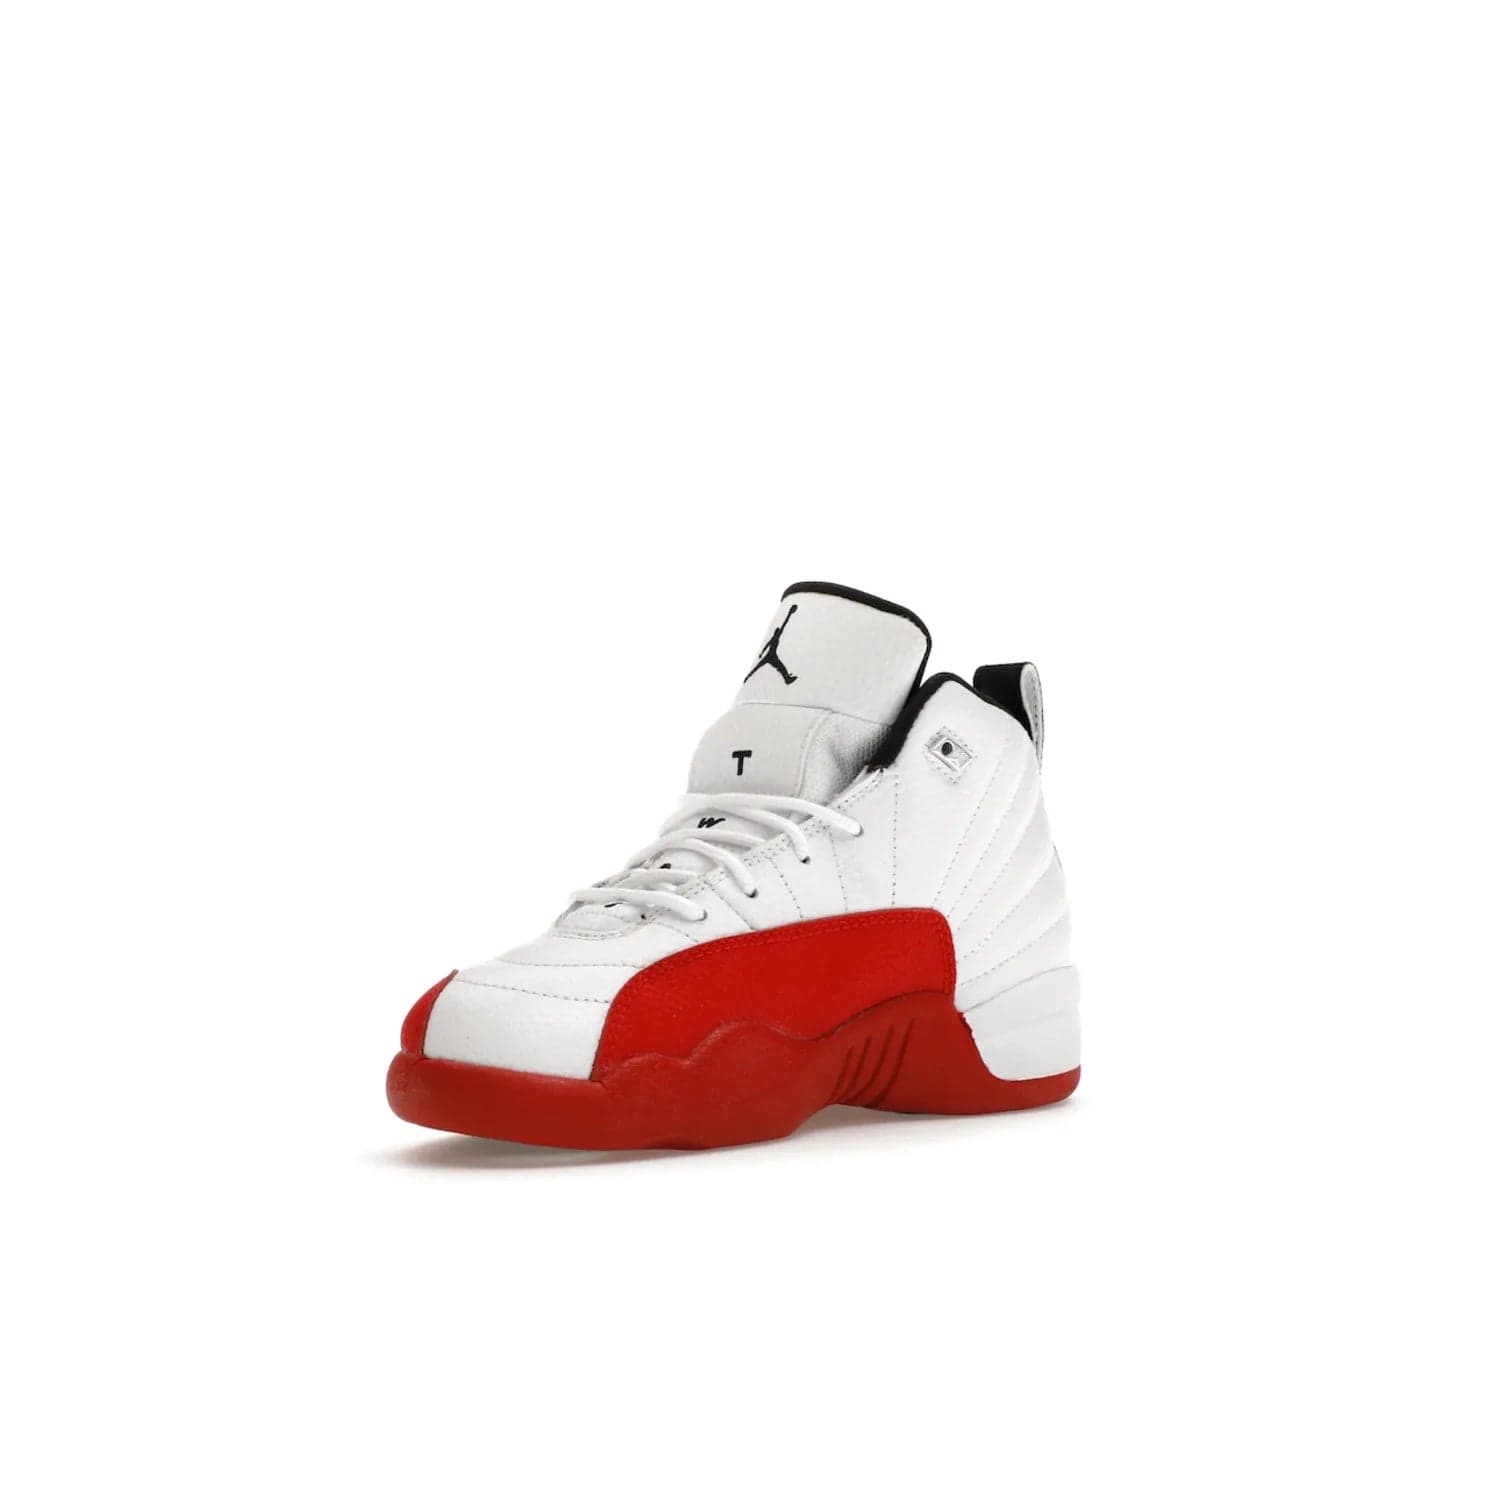 Jordan 12 Retro Cherry (2023) (PS) - Image 15 - Only at www.BallersClubKickz.com - Jordan 12 Retro Cherry dropping for toddlers in 2023! White leather upper with black overlays and red branding. Classic court style for your little one.